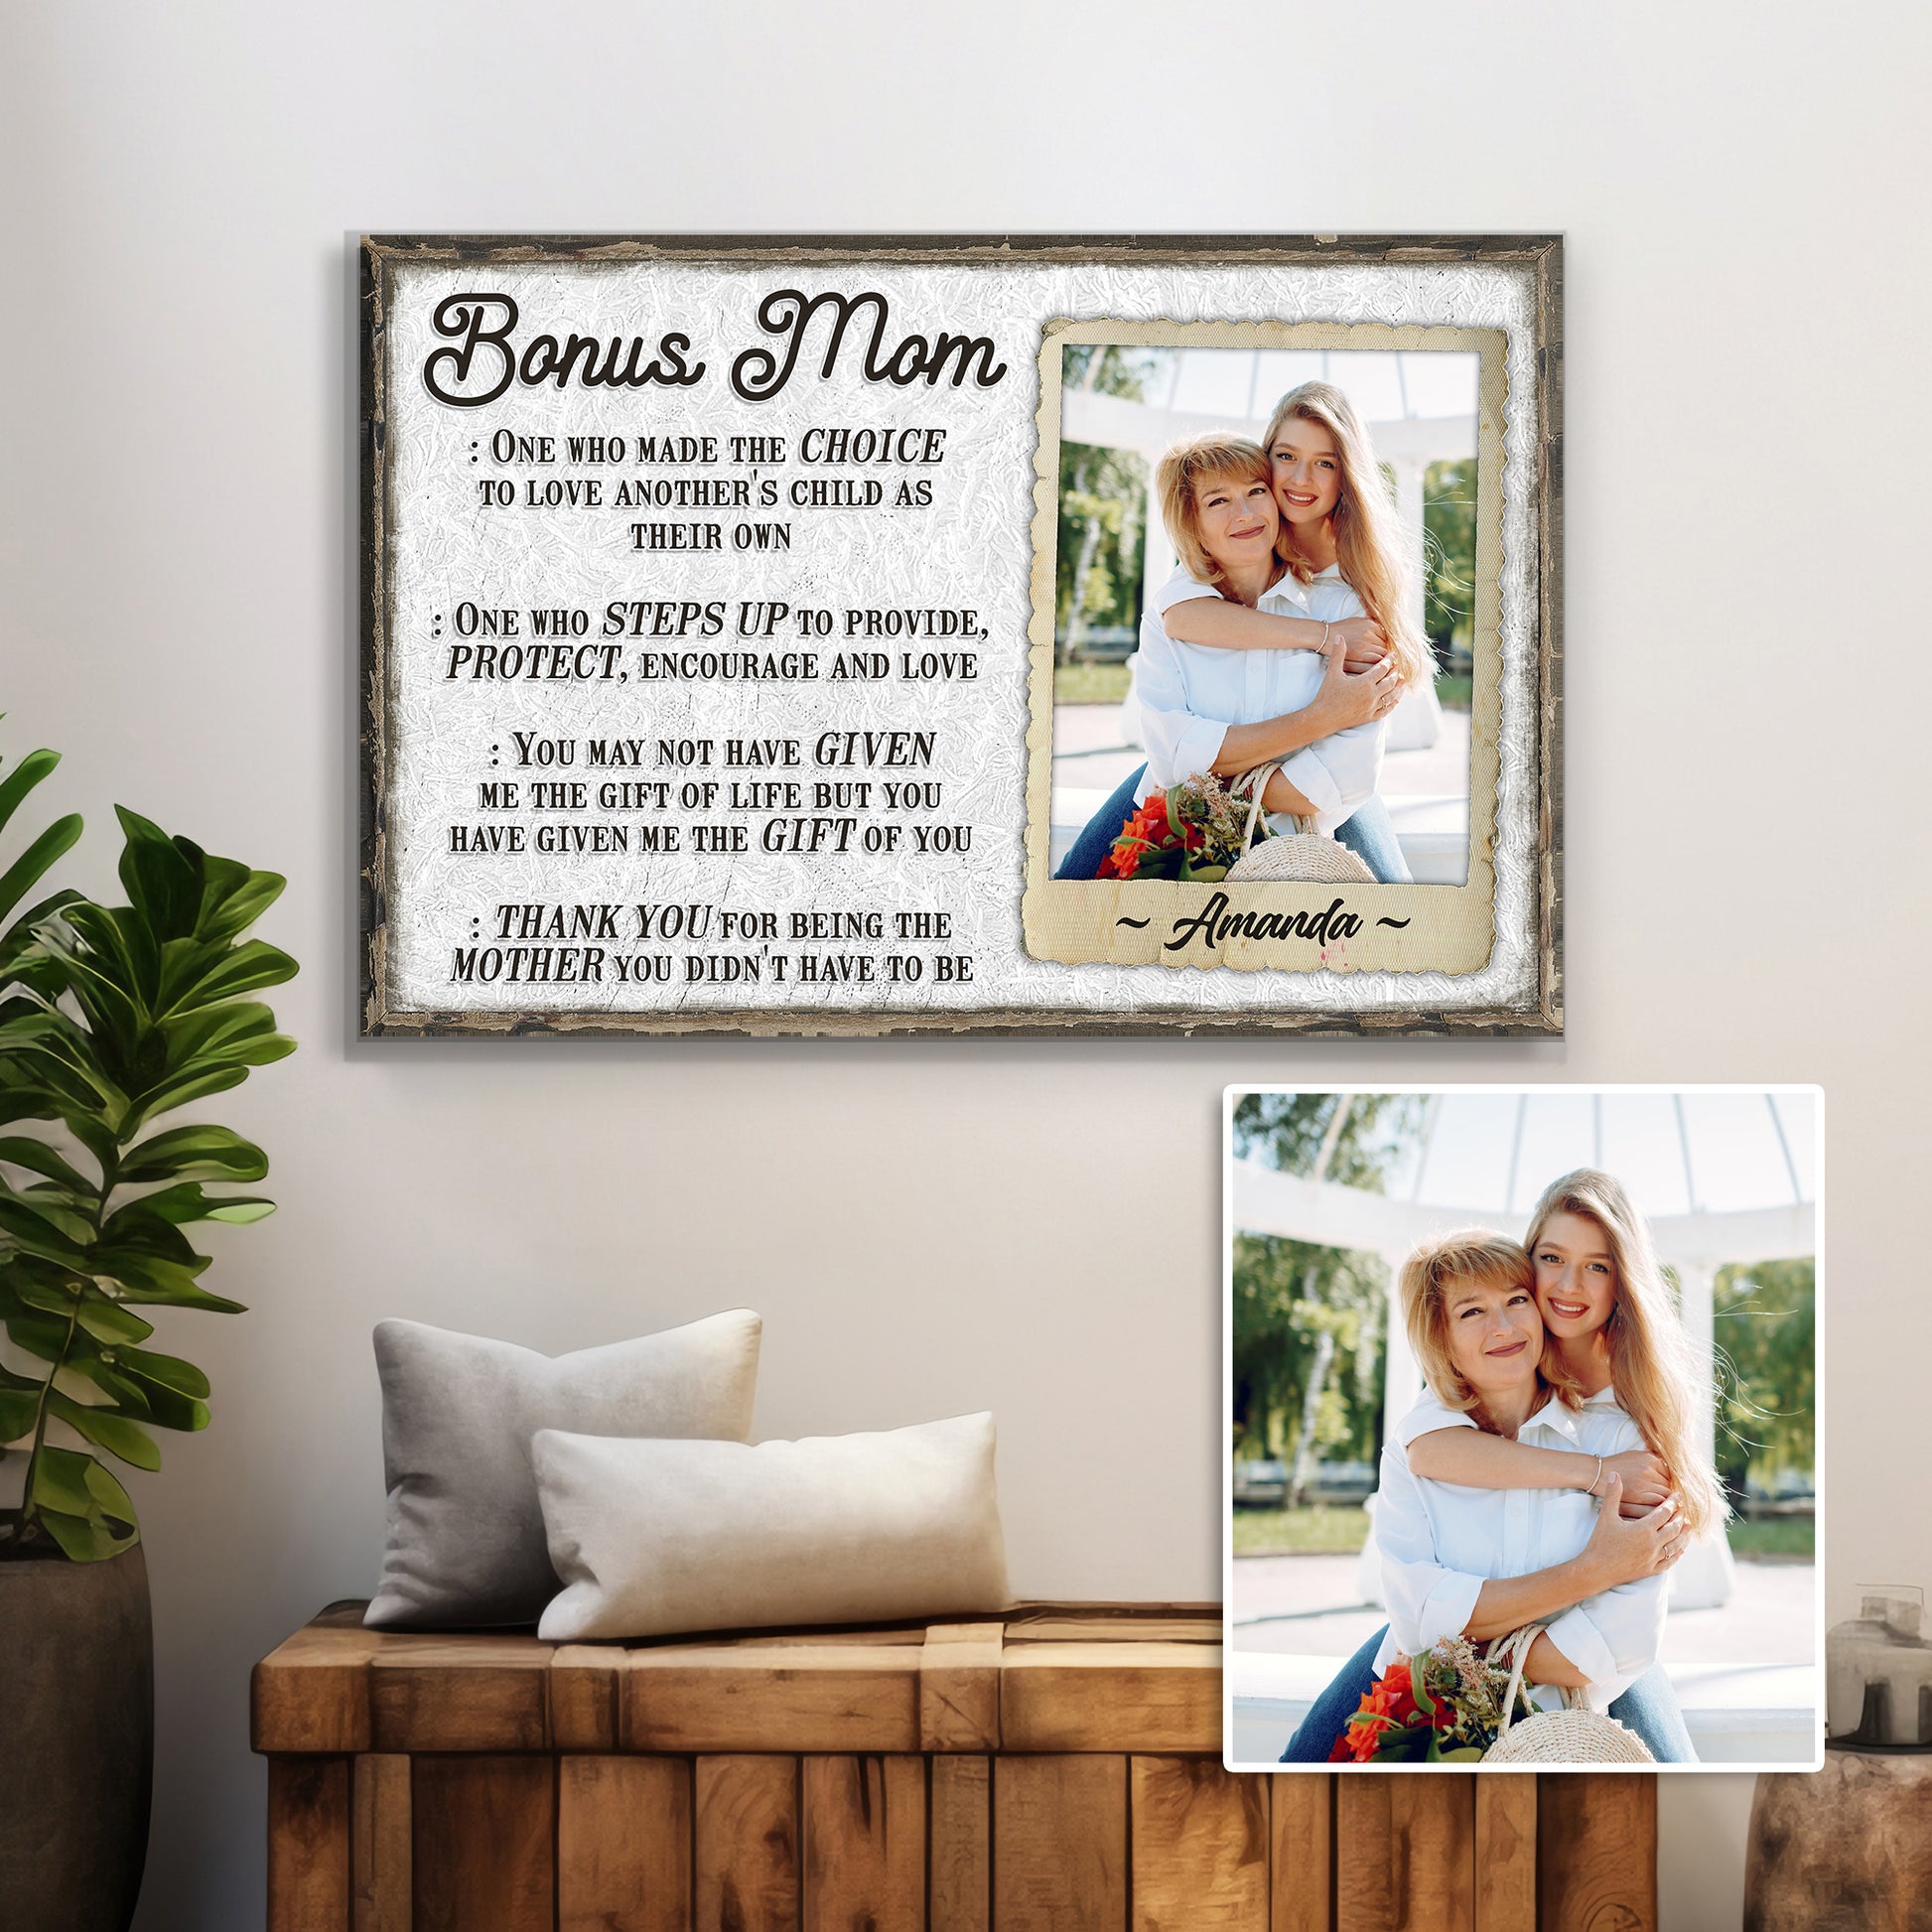 Bonus Mom Customized Sign  - Image by Tailored Canvases